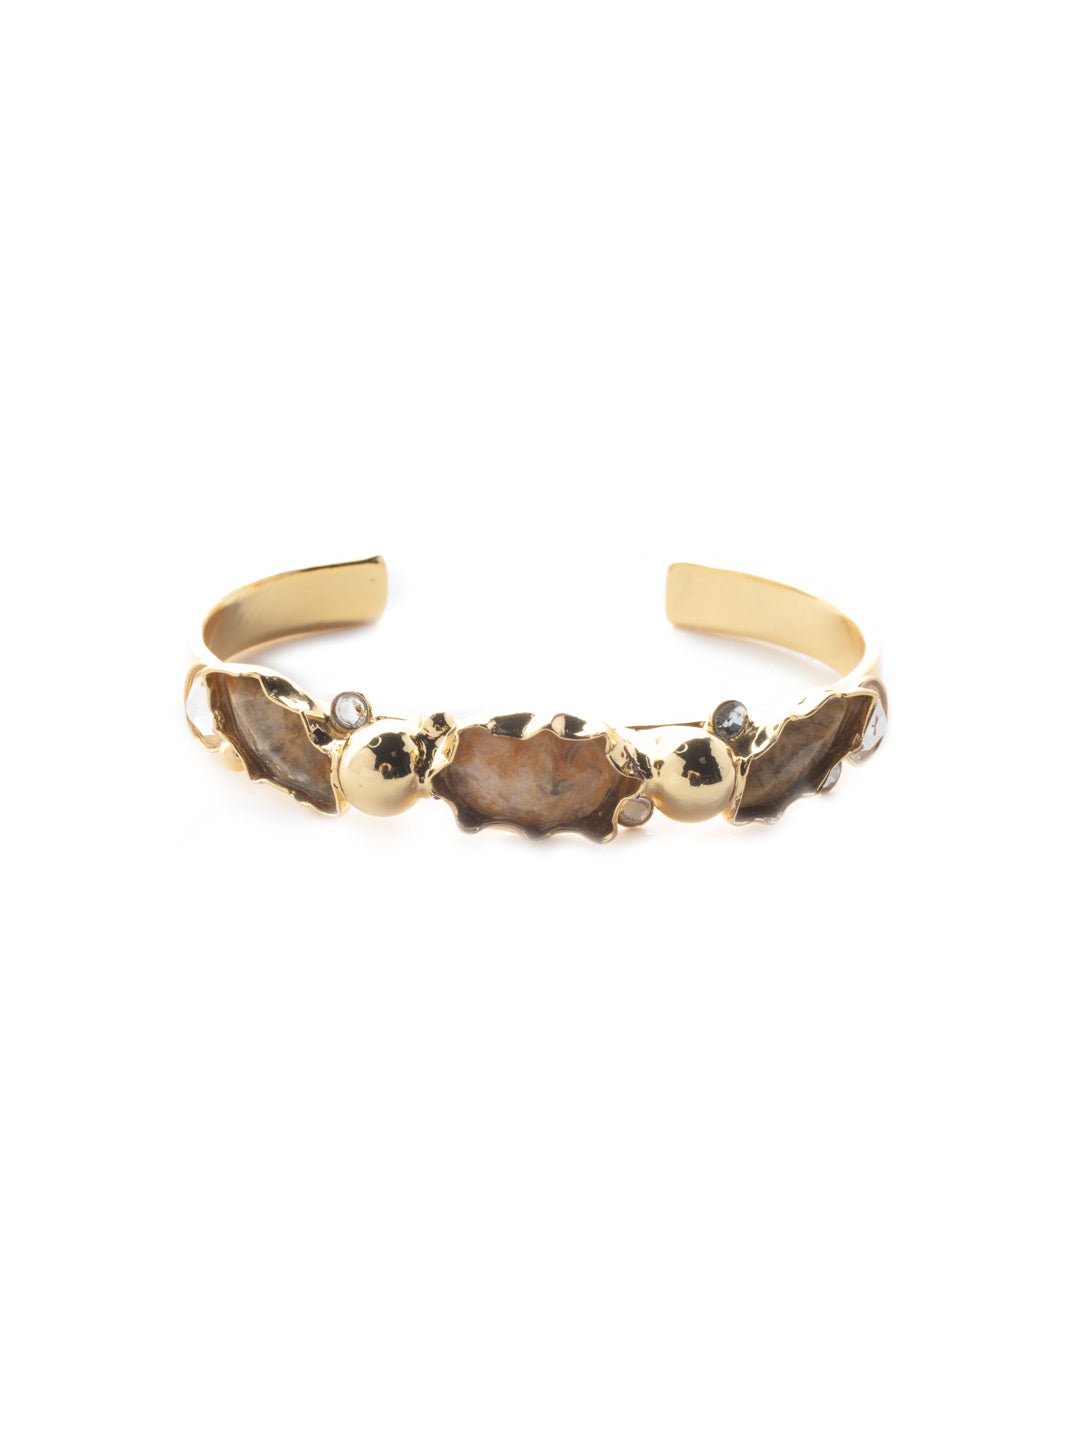 Vivian Cuff Bracelet - 4BEV9BGIND - The Vivian Cuff bracelet is a beautiful blend of crystals and stones; perfect for dressing up or down, and adjustable for multiple sizes. From Sorrelli's Industrial collection in our Bright Gold-tone finish.